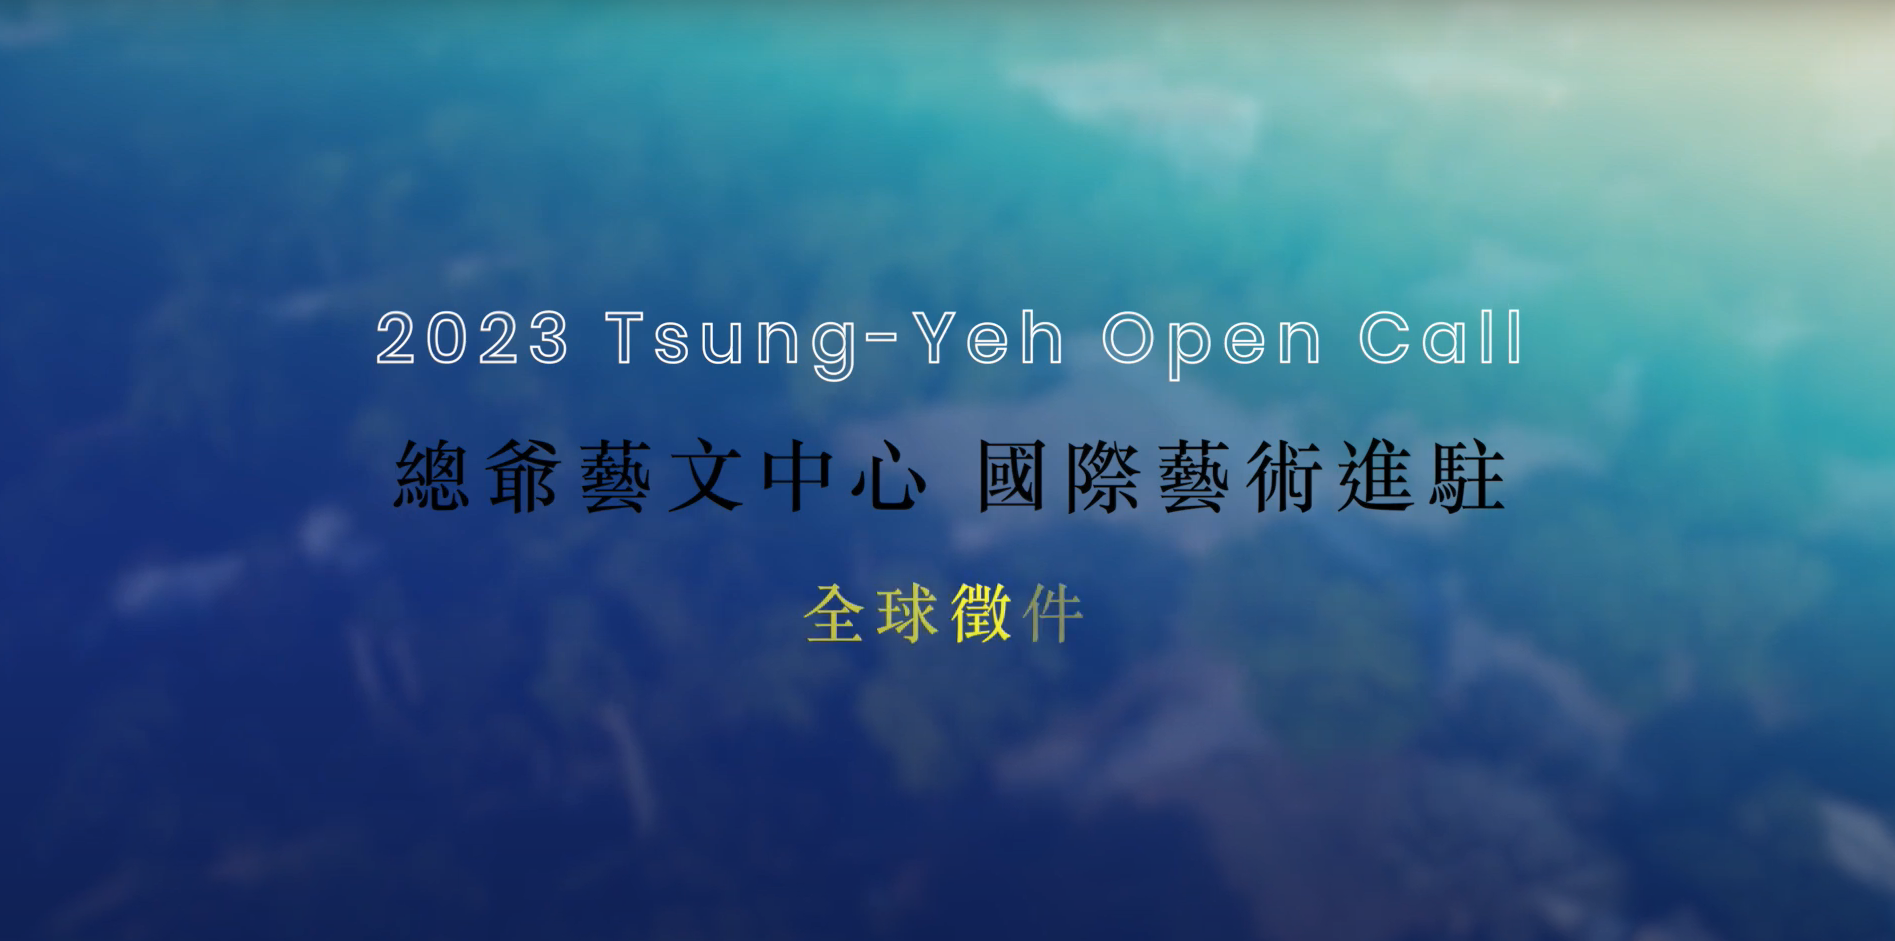 Artists-in-Residence (AIR) Program for 2023  Tsung-yeh Art and Cultural Center 